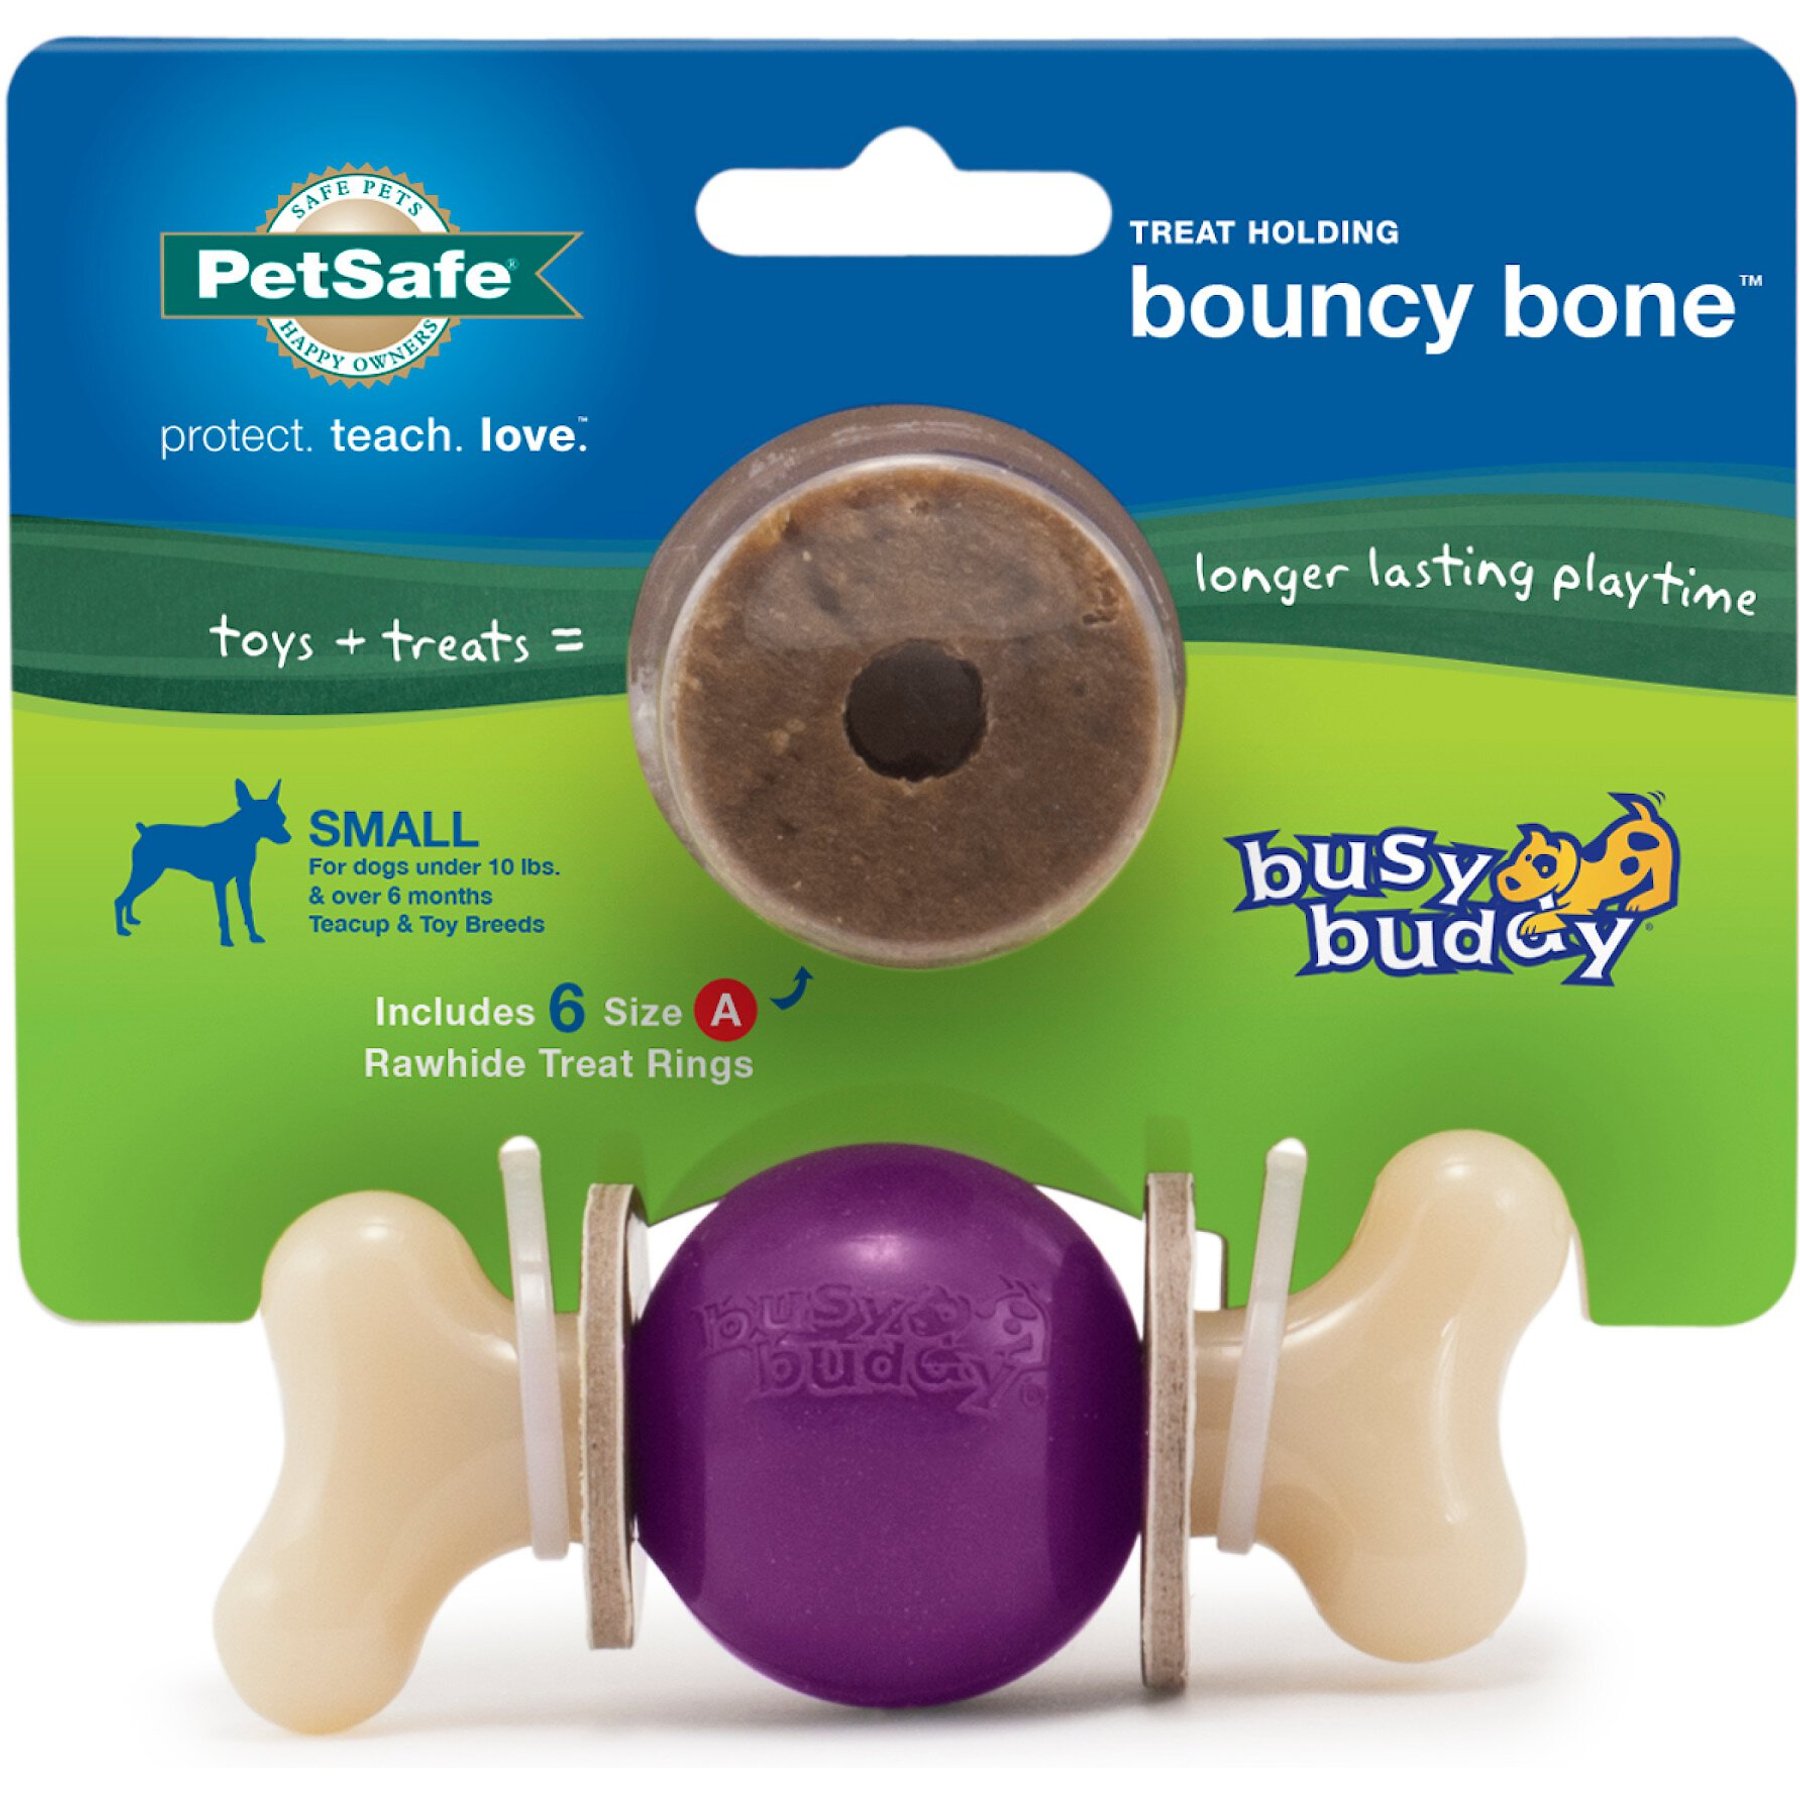 Busy Buddy® Barnacle Dog Toy